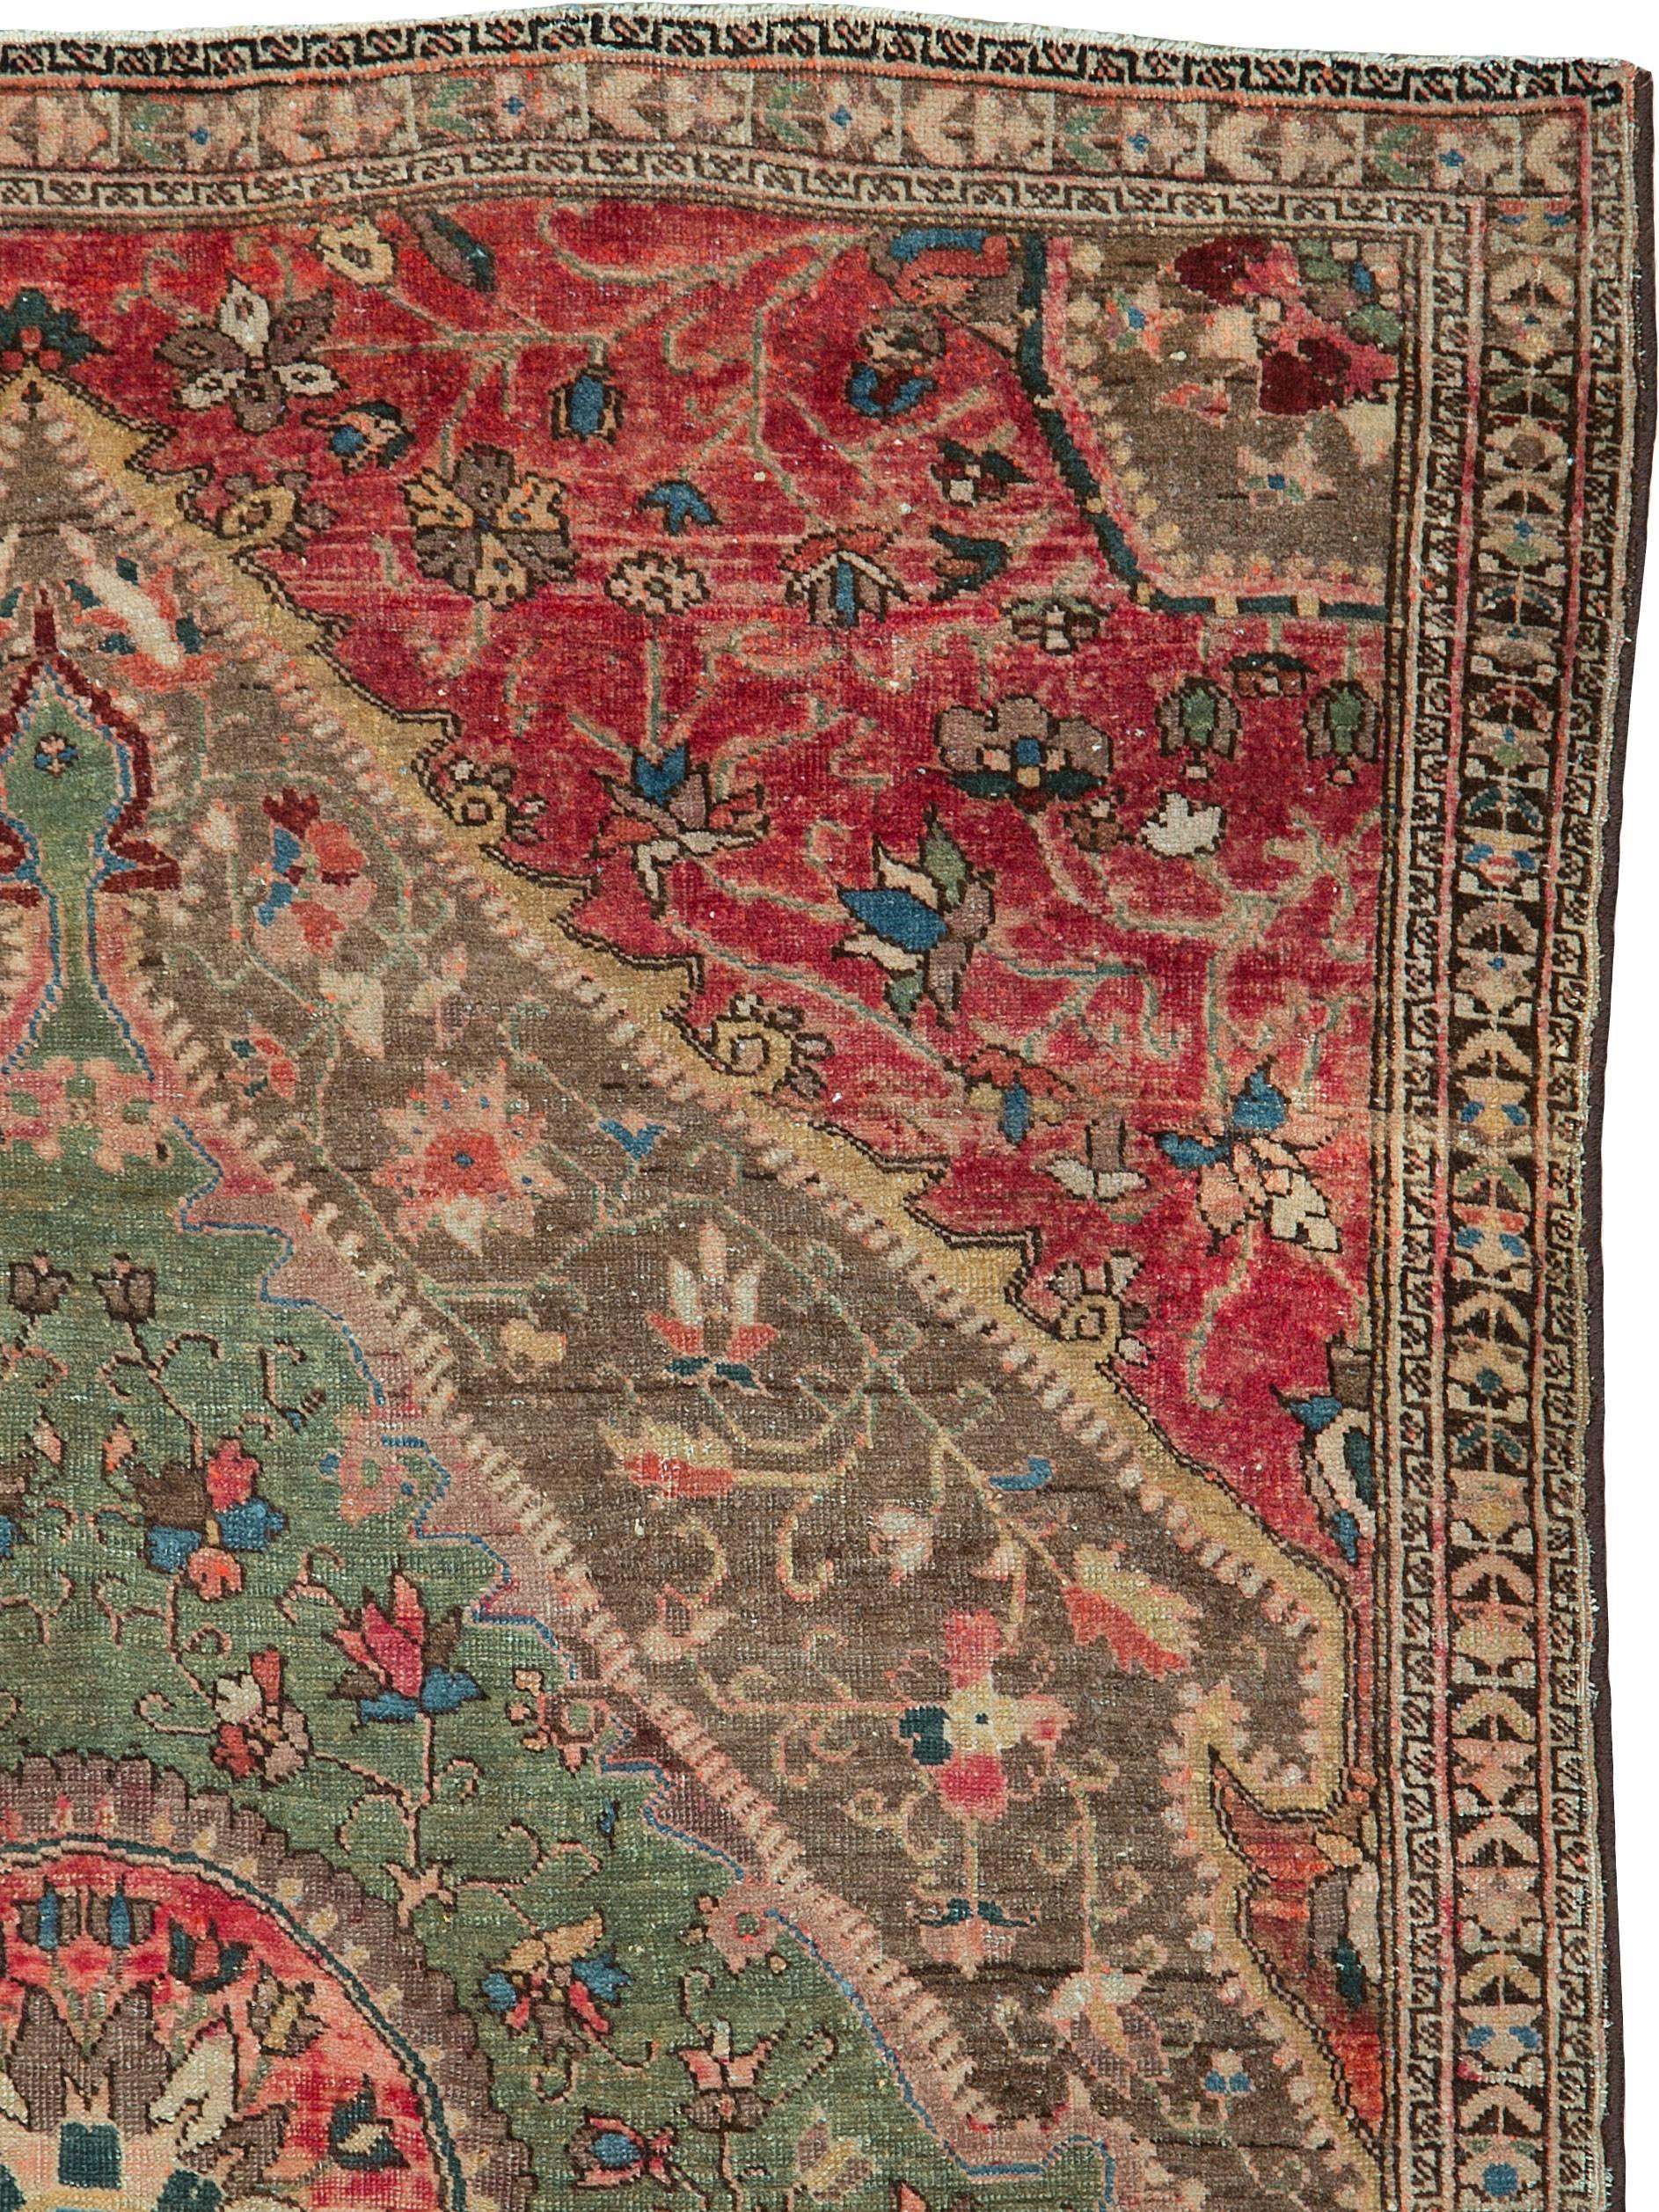 An antique Persian Sarouk Farahan (Feraghan) carpet from the turn of the 20th century.  The red in the field has been enhanced by going through an overdye process.